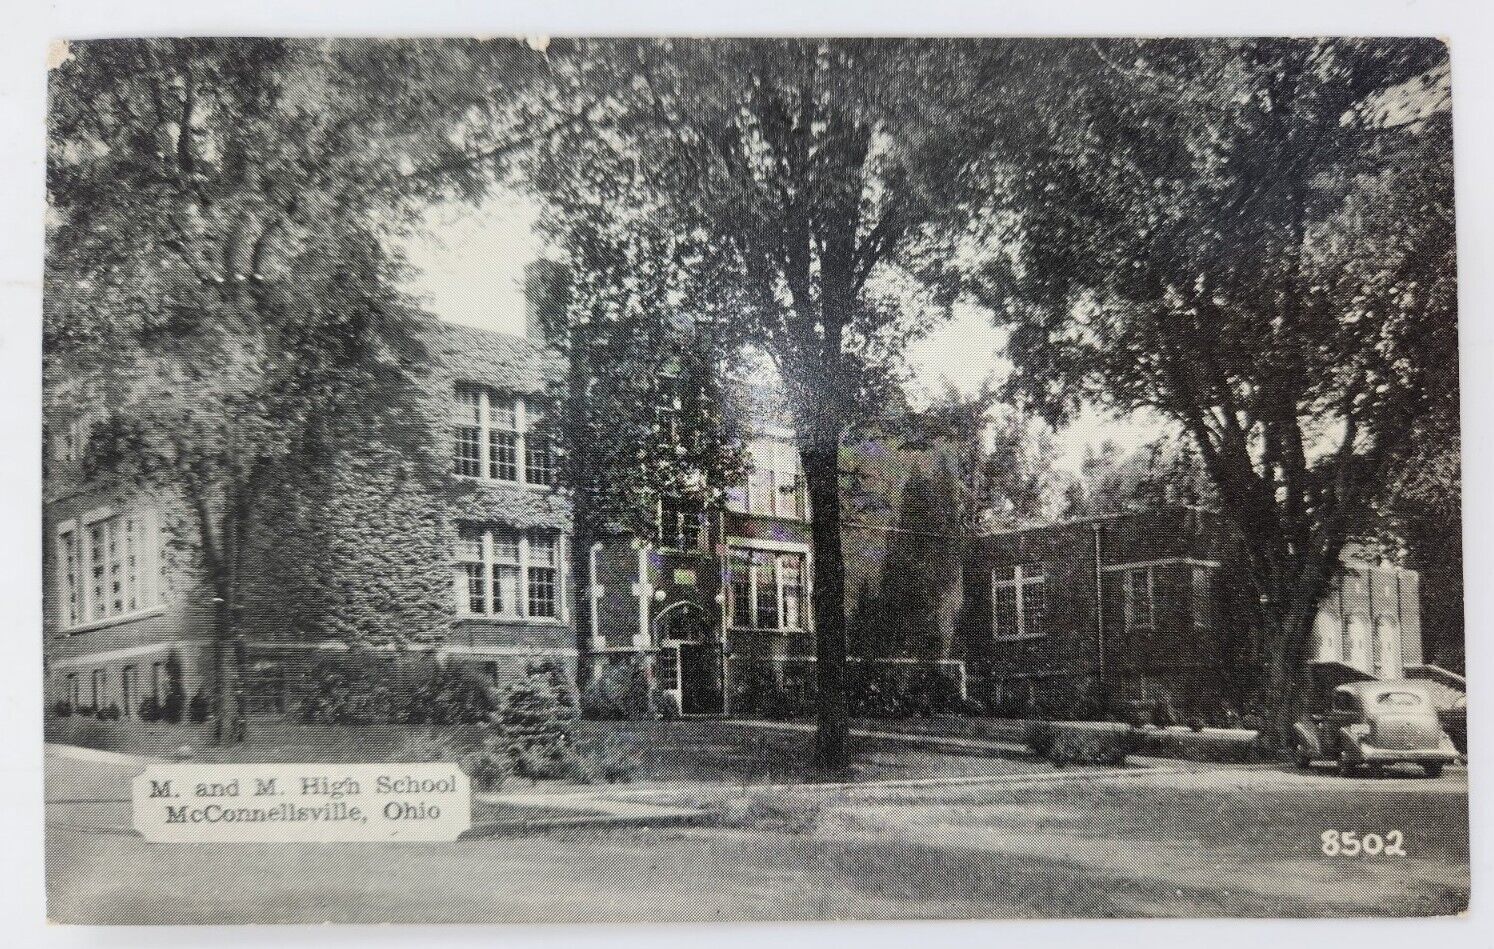 M and M High School McConnellsville Ohio OH c1941 Vintage Postcard